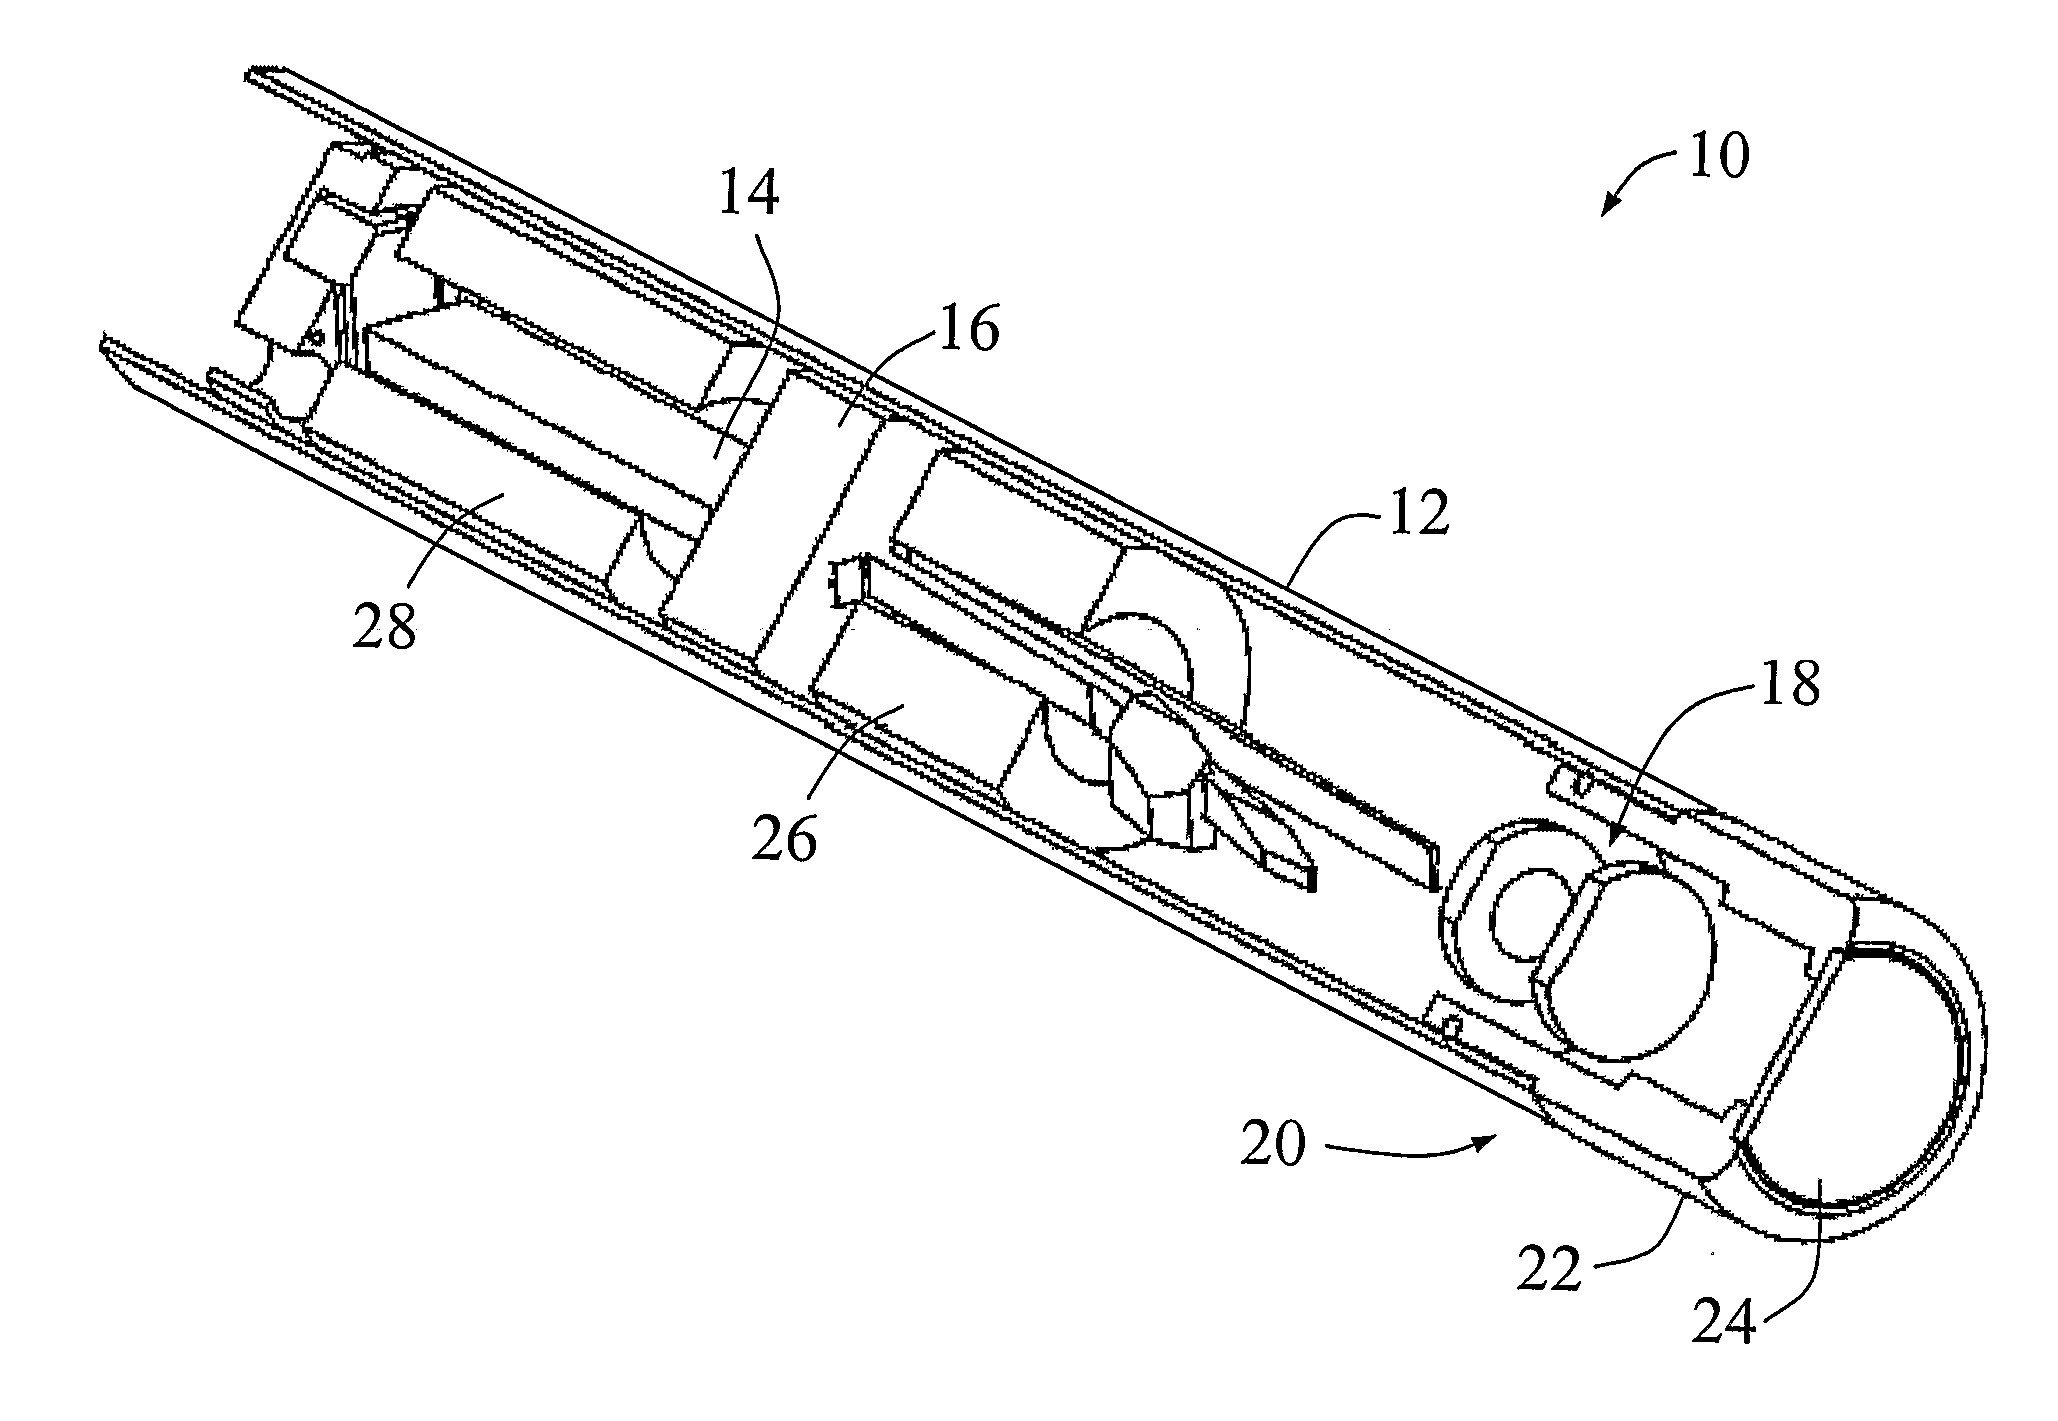 Tuning-Fork-Type Scanning Apparatus with a Counterweight